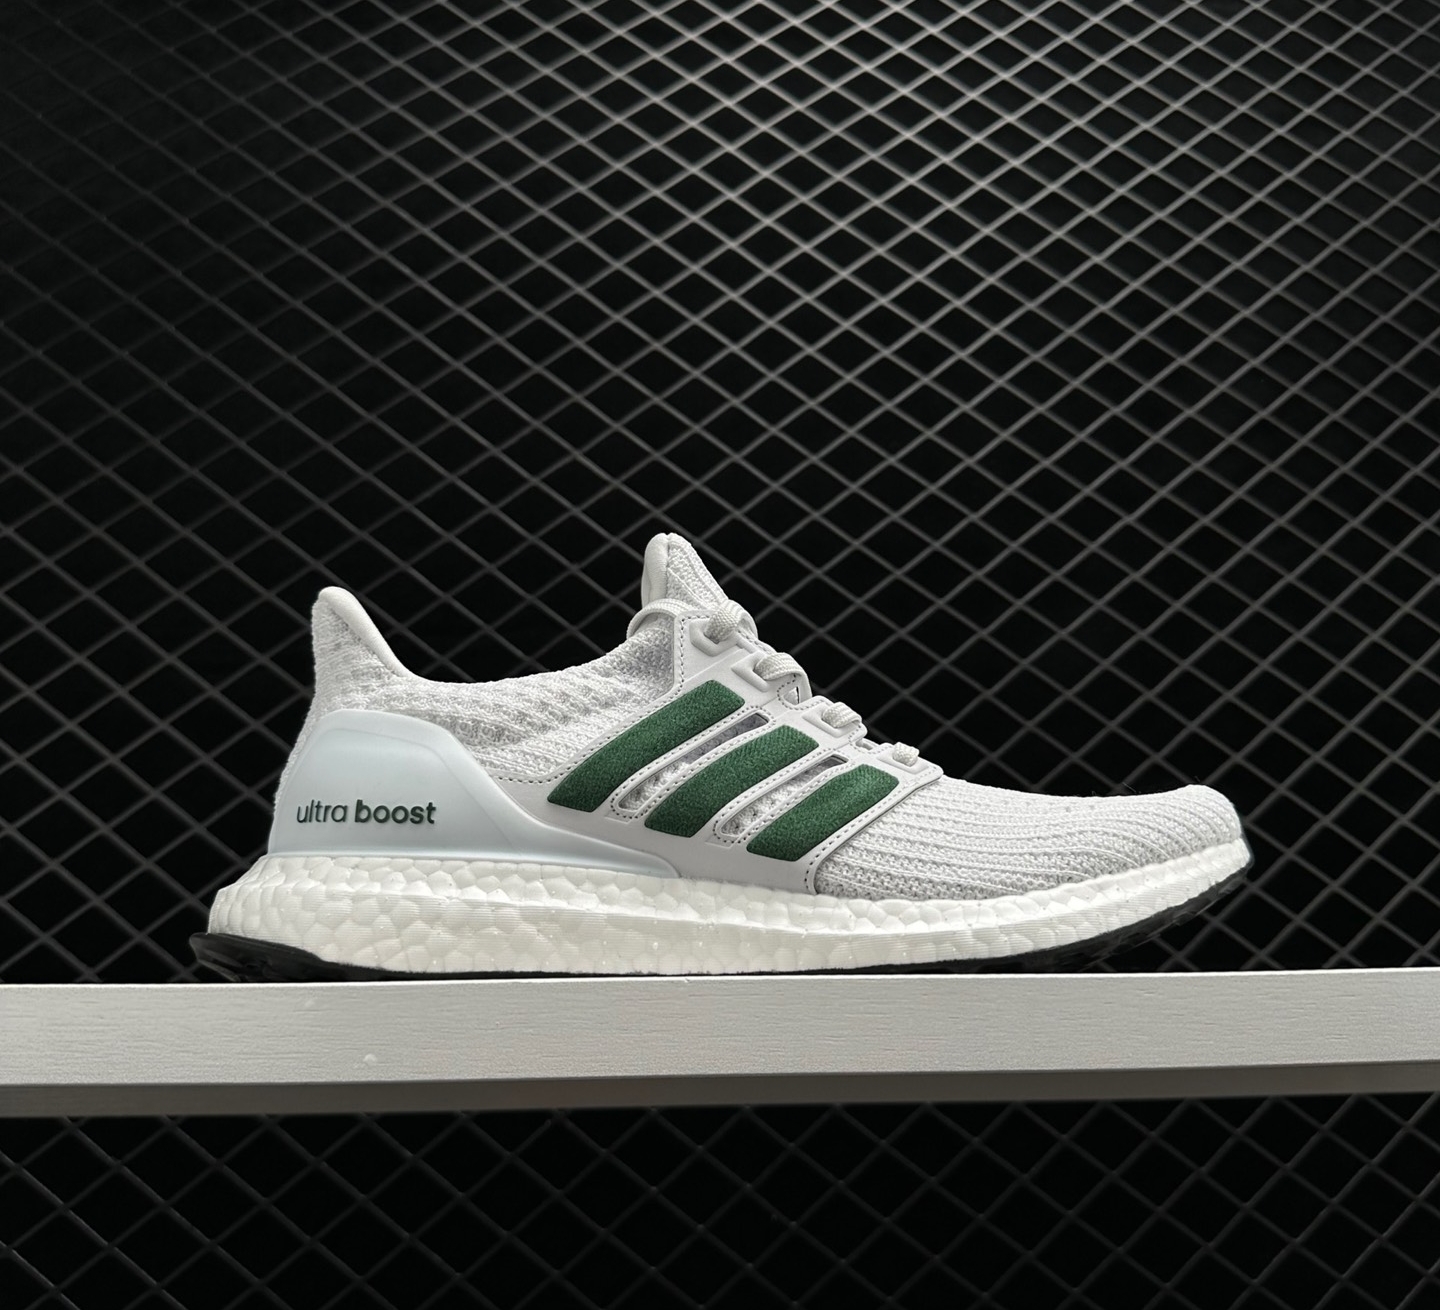 Adidas UltraBoost 4.0 DNA White Green FY9338 - Stylish Sneakers for Performance